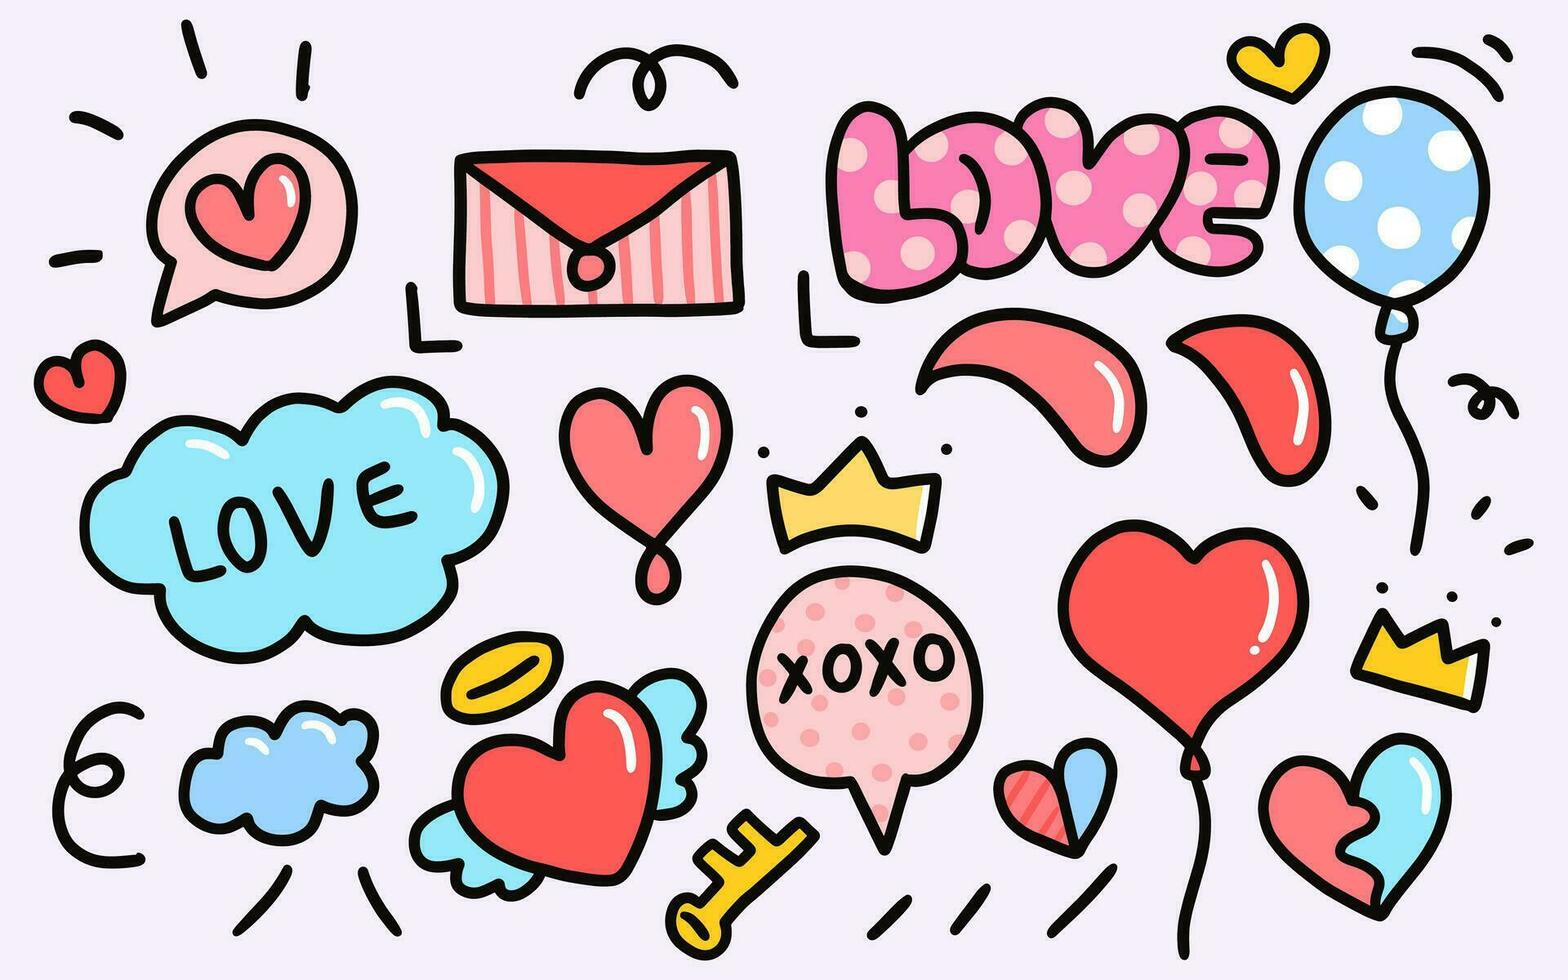 doodle Hand drawn heart cartoon. isolated elements set for Valentine's day vector